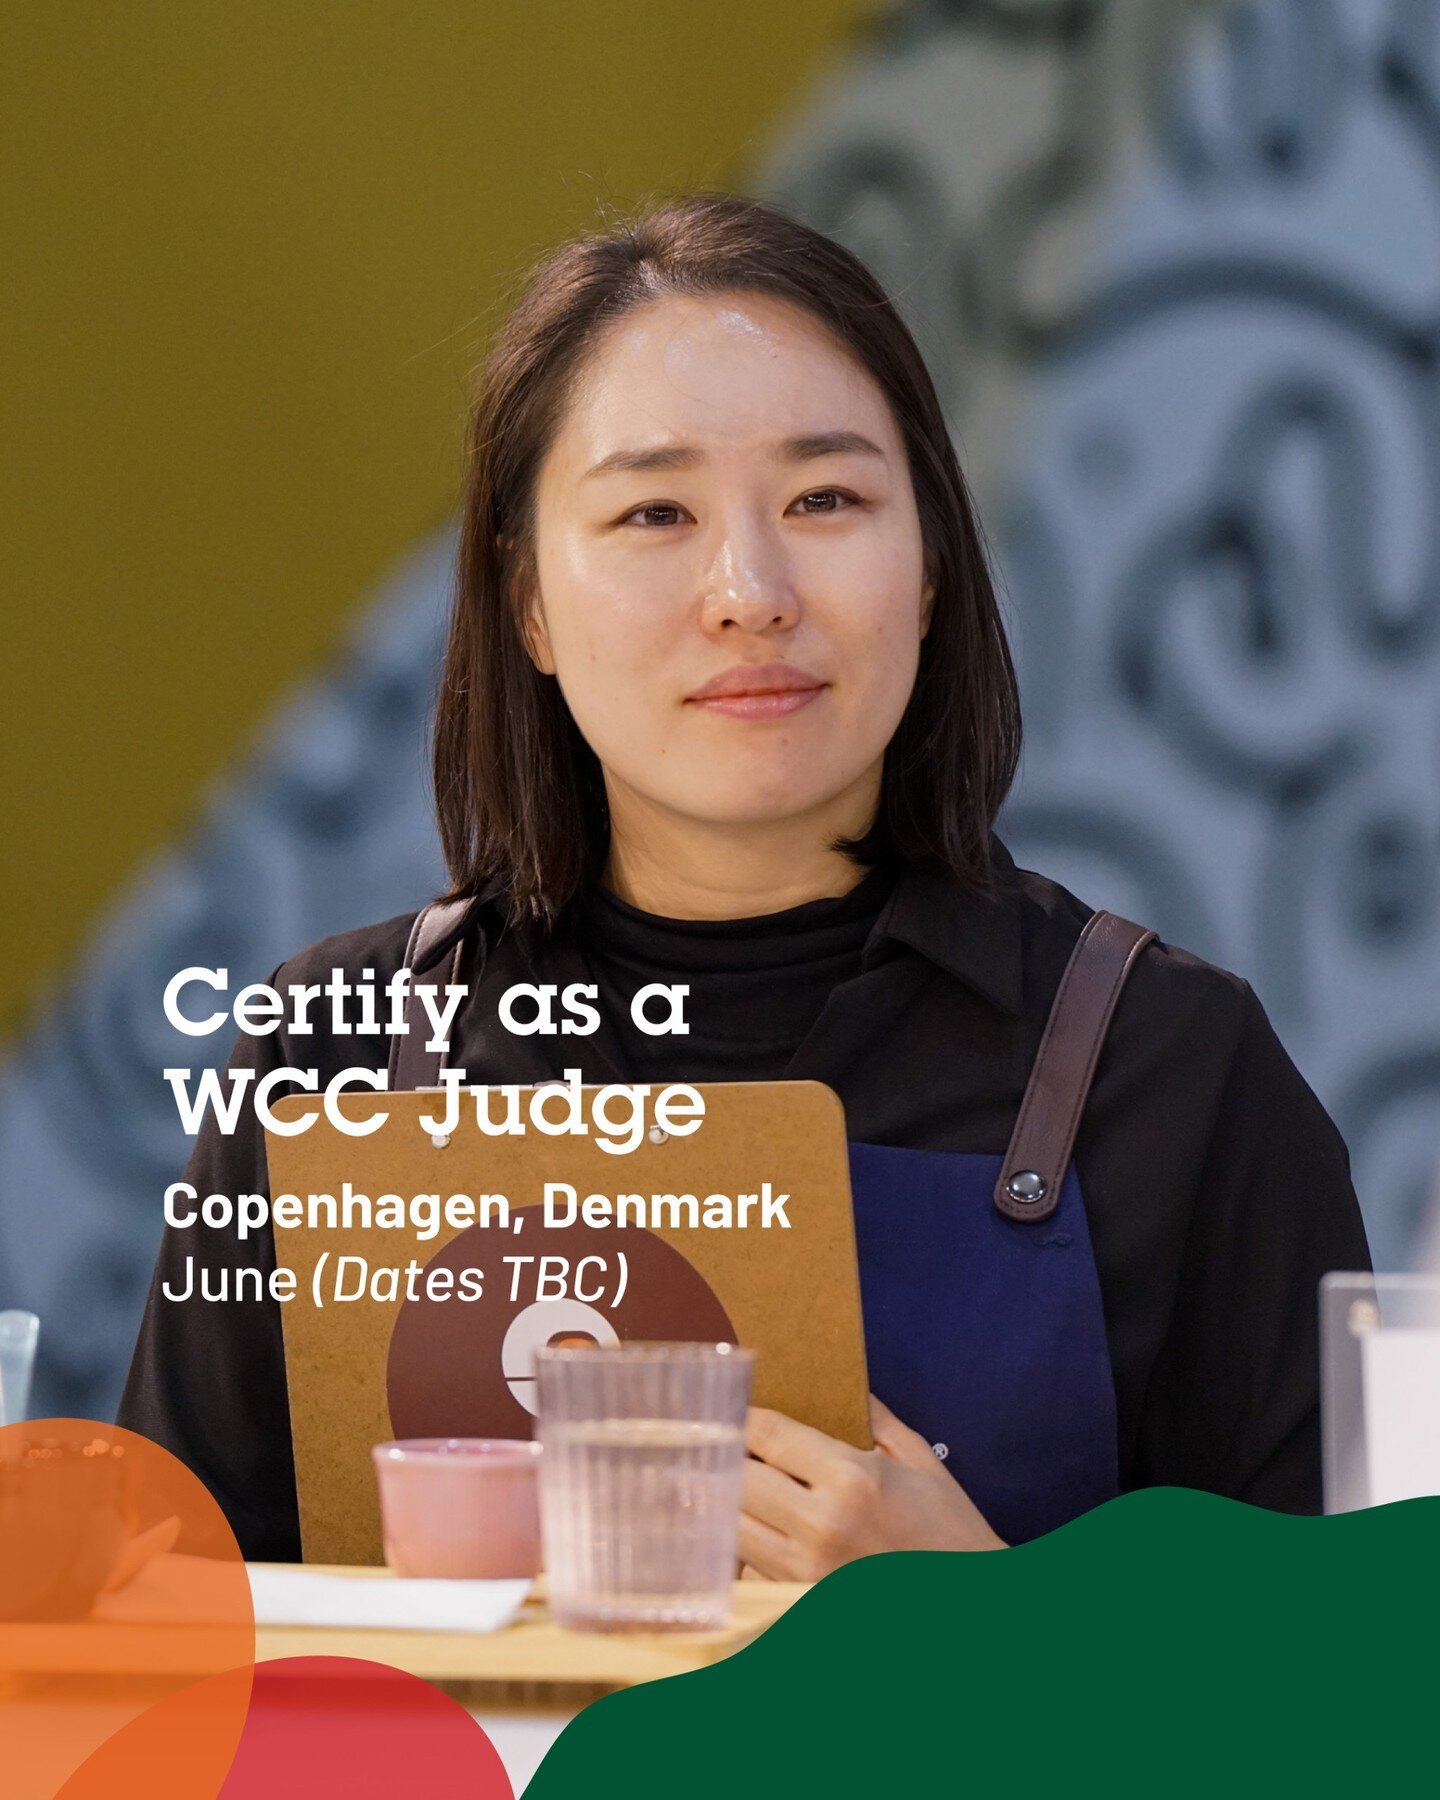 We've added another Judge Certification ahead of the Copenhagen World Coffee Championships this June. Judges with the required experience can join this event to certify on the skills and competencies to evaluate competitors on the world stage. Find o